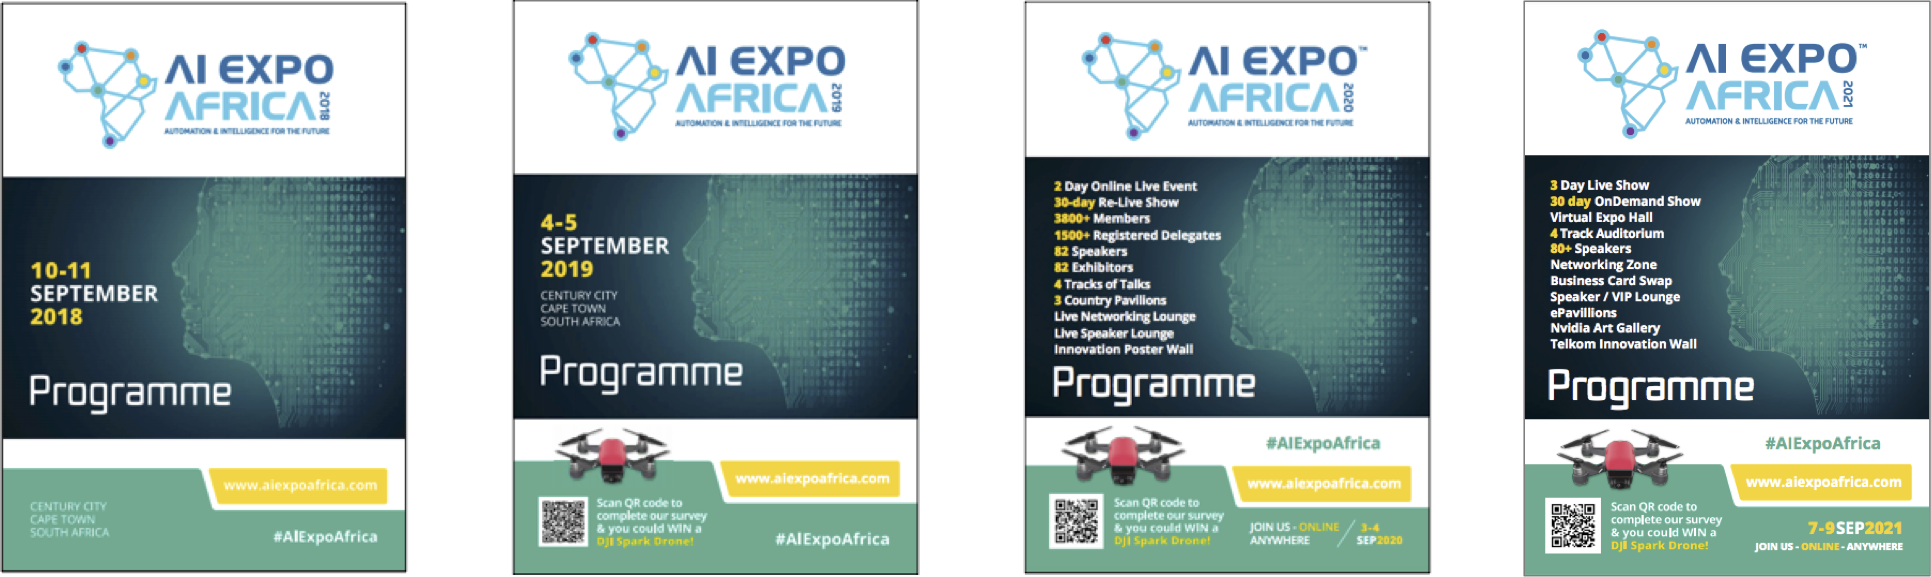 ai expo africa 4 years of excellence